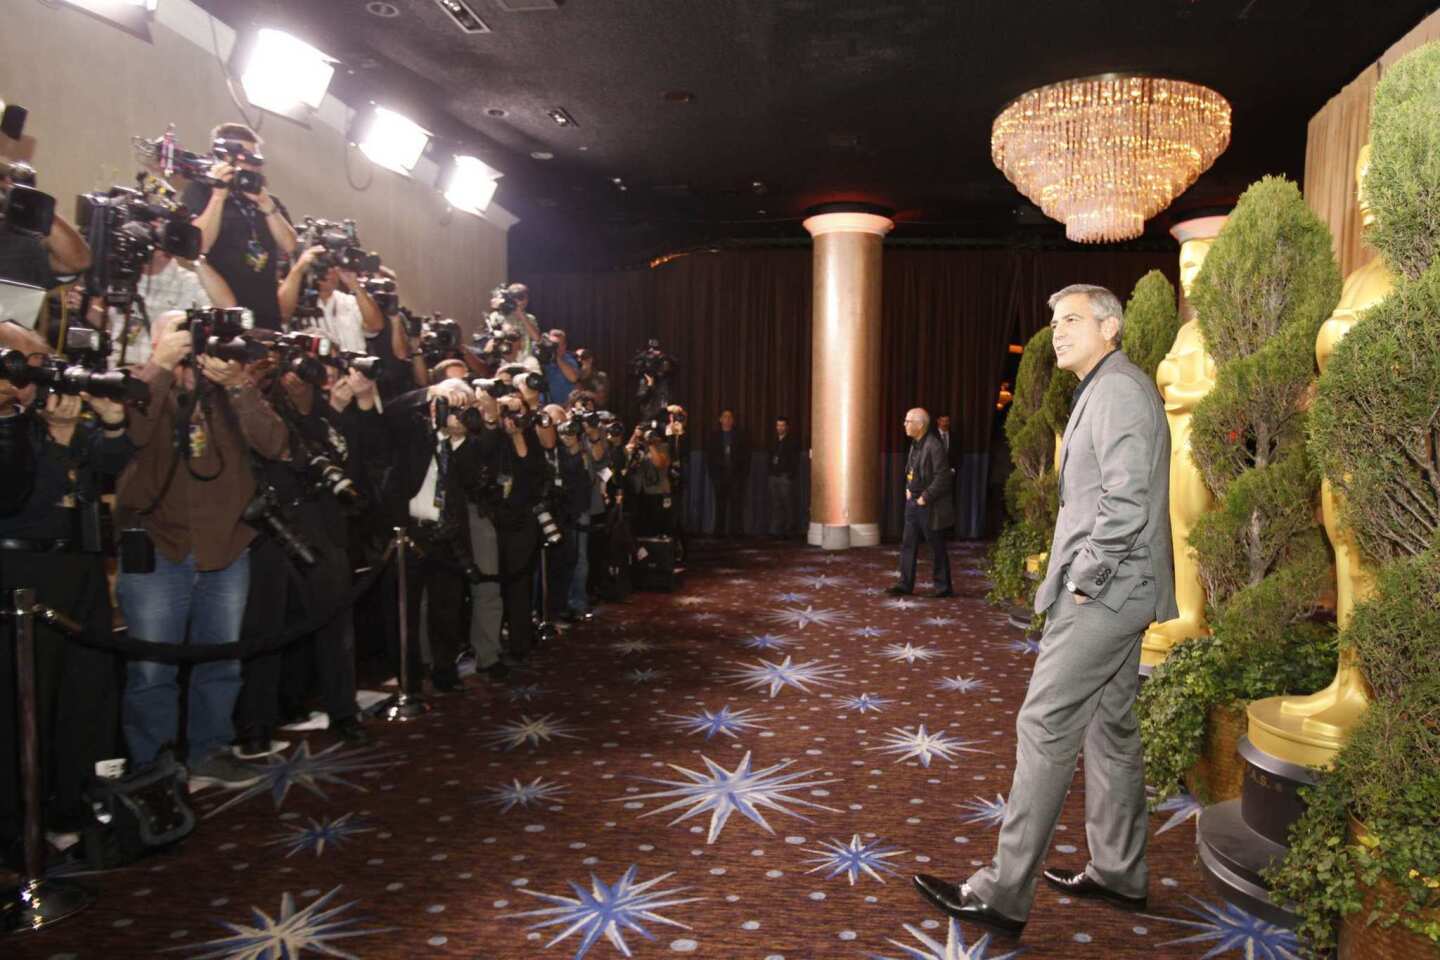 "The Descendants" nominee George Clooney braves the flashbulbs of numerous photographers.